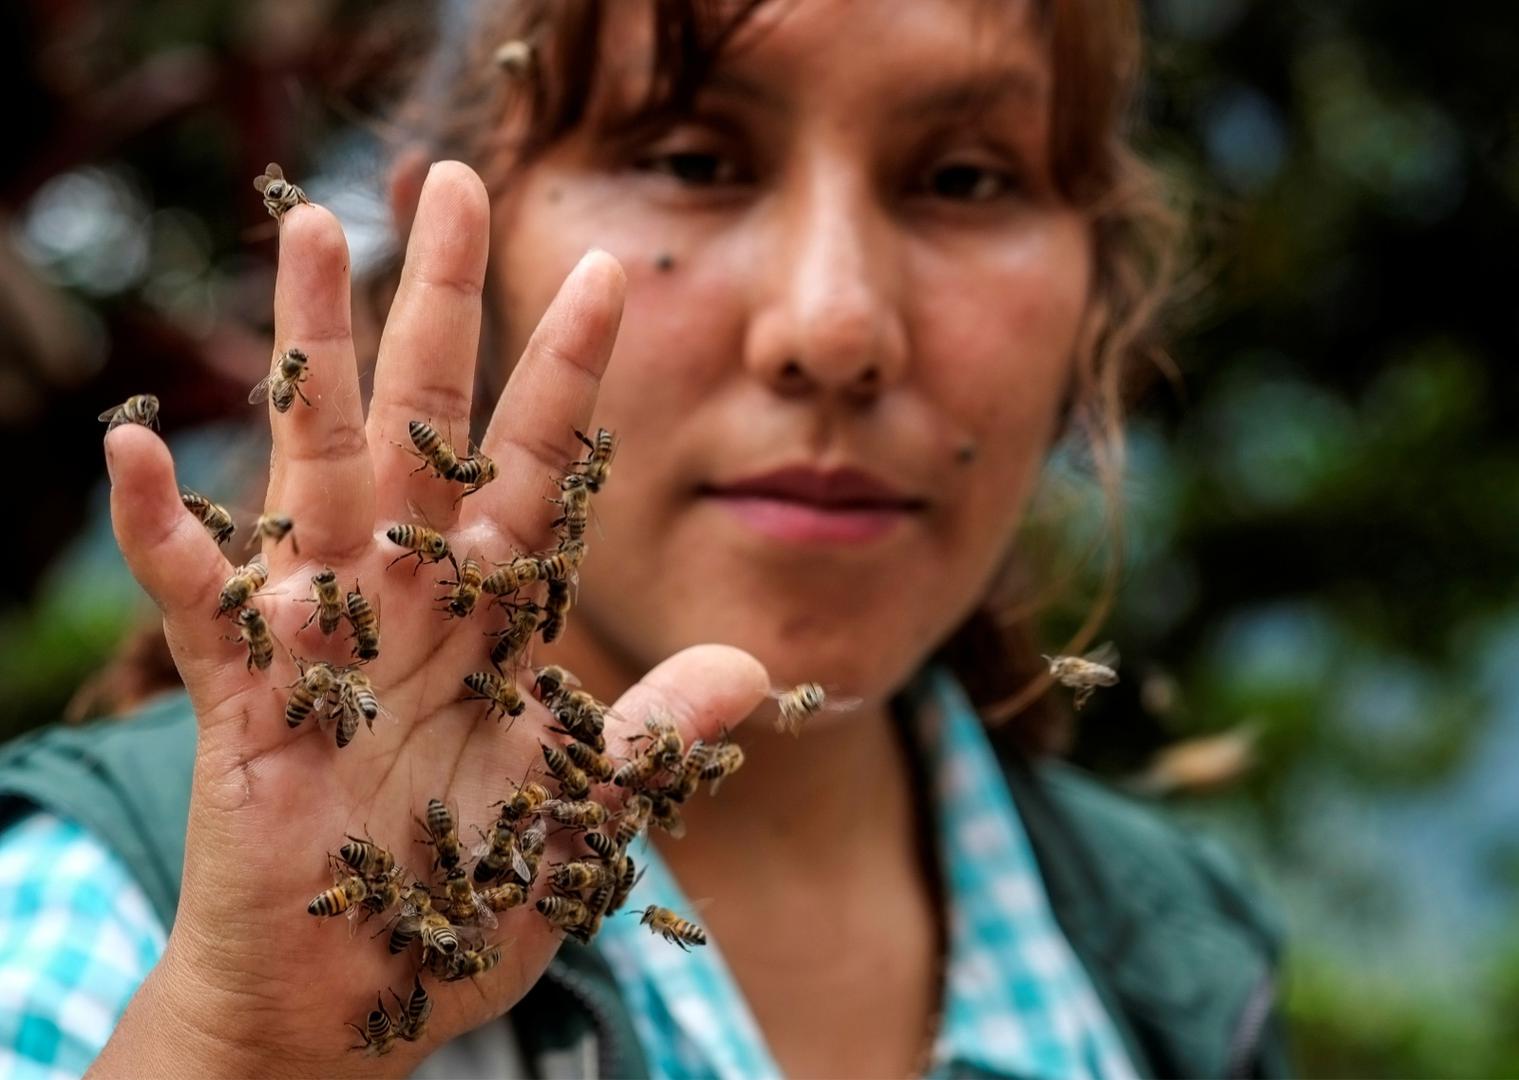 Cynthia Callizaya shows bees on her hand at her bee sanctuary Las Orquideas Ecoparque in Cotapata, Yungas Cynthia Callizaya shows bees on her hand at her bee sanctuary Las Orquideas Ecoparque in Cotapata, Yungas, Bolivia, January 13, 2021. Picture taken January 13, 2021. REUTERS/David Mercado DAVID MERCADO